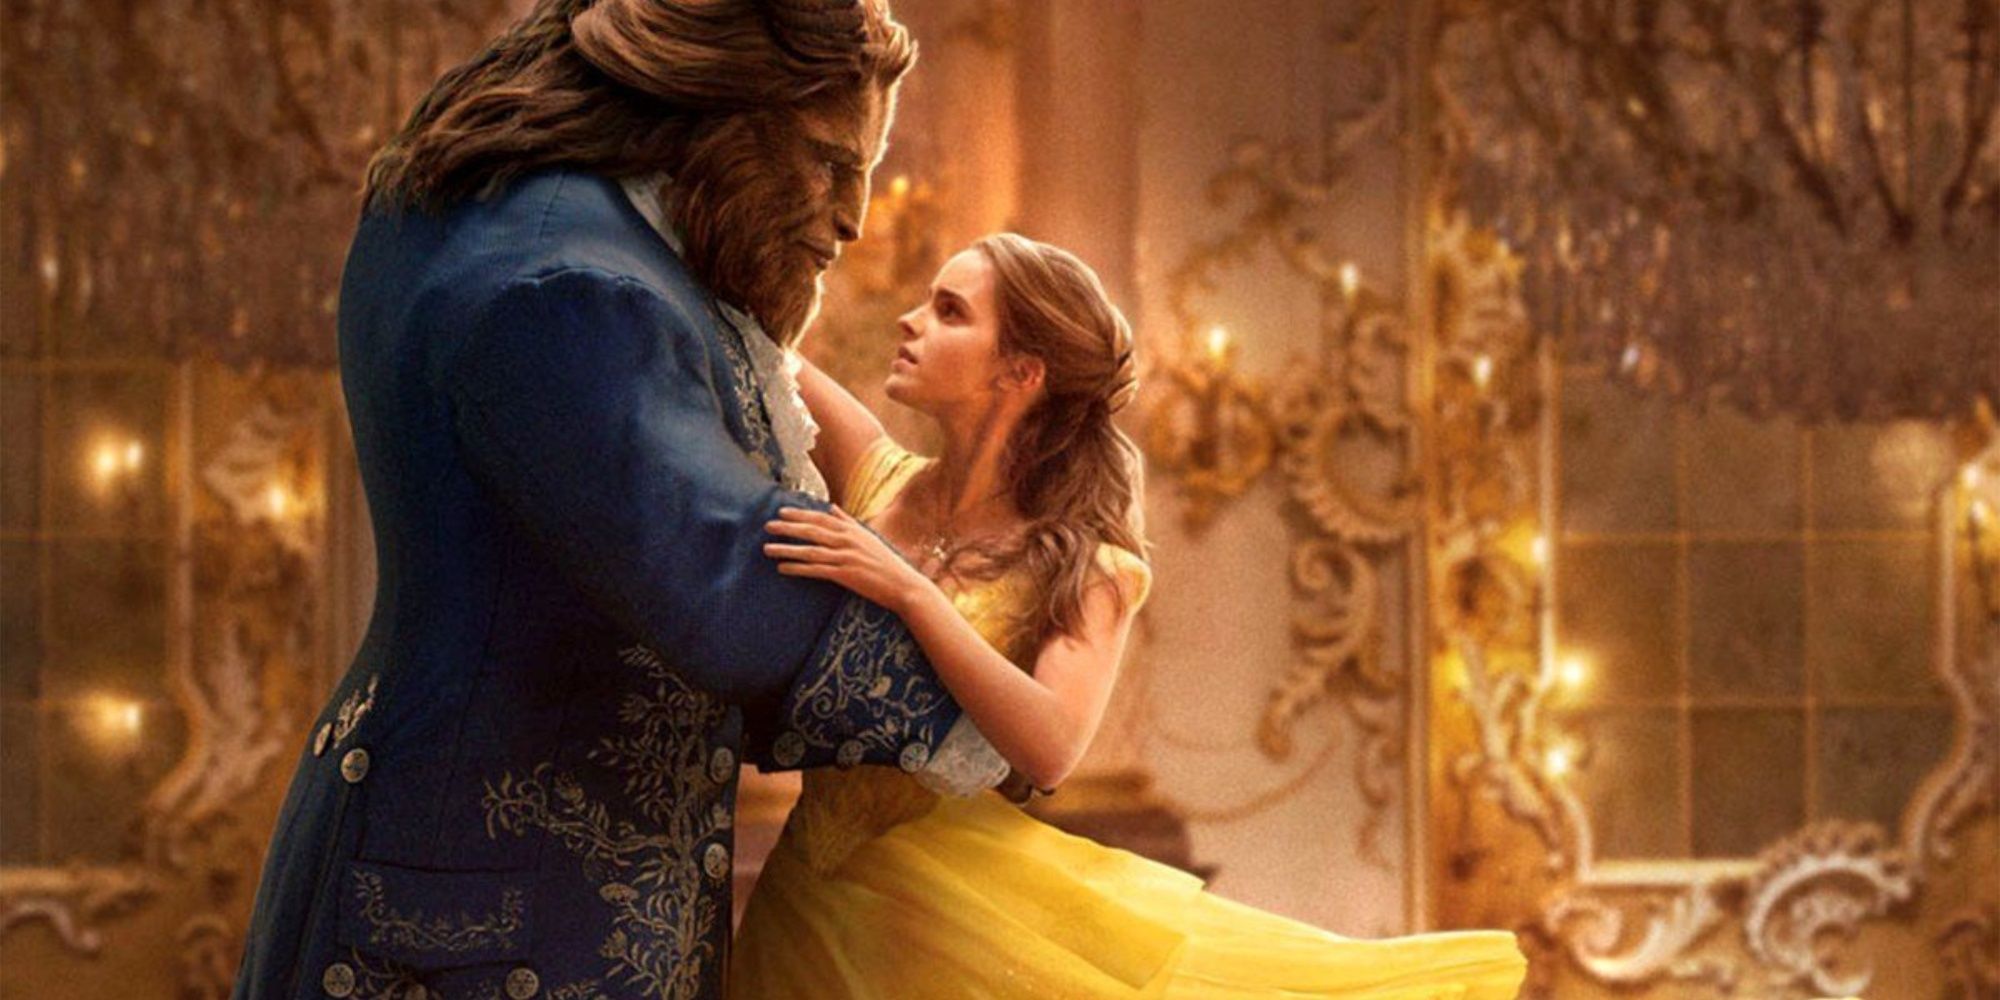 The Beast in her iconic yellow dress dances with Emma Watson's Belle.